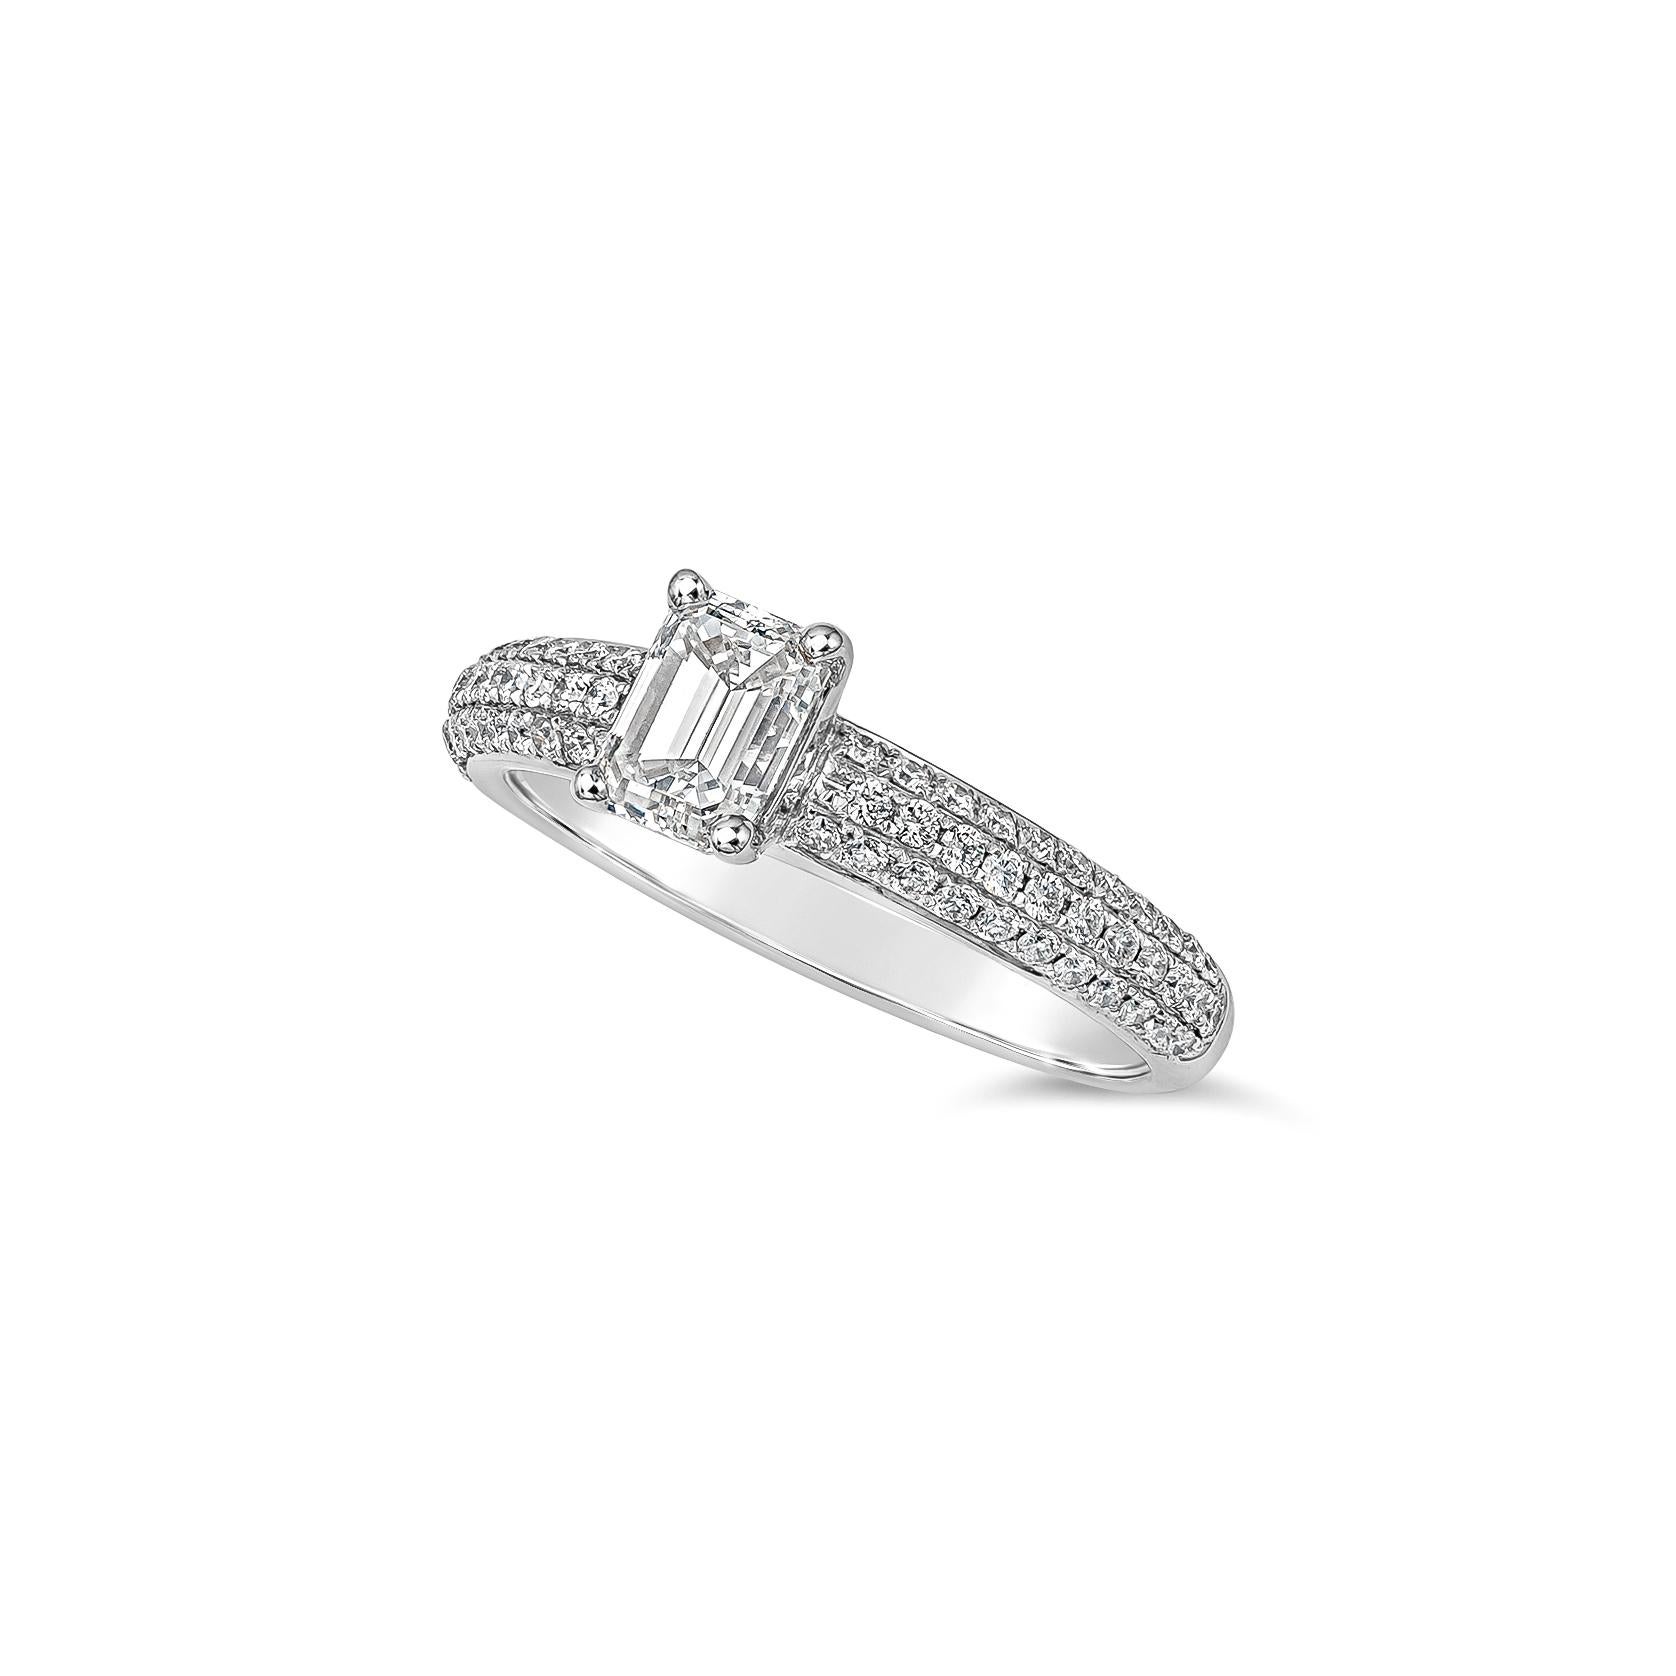 This ring features a single 0.80 carat emerald cut diamond center stone. Three -row round brilliant melee diamonds are pave set half way down the shank, weighing 0.36 carats total. Made with 18K White Gold. Size 6.5 US

Style available in different